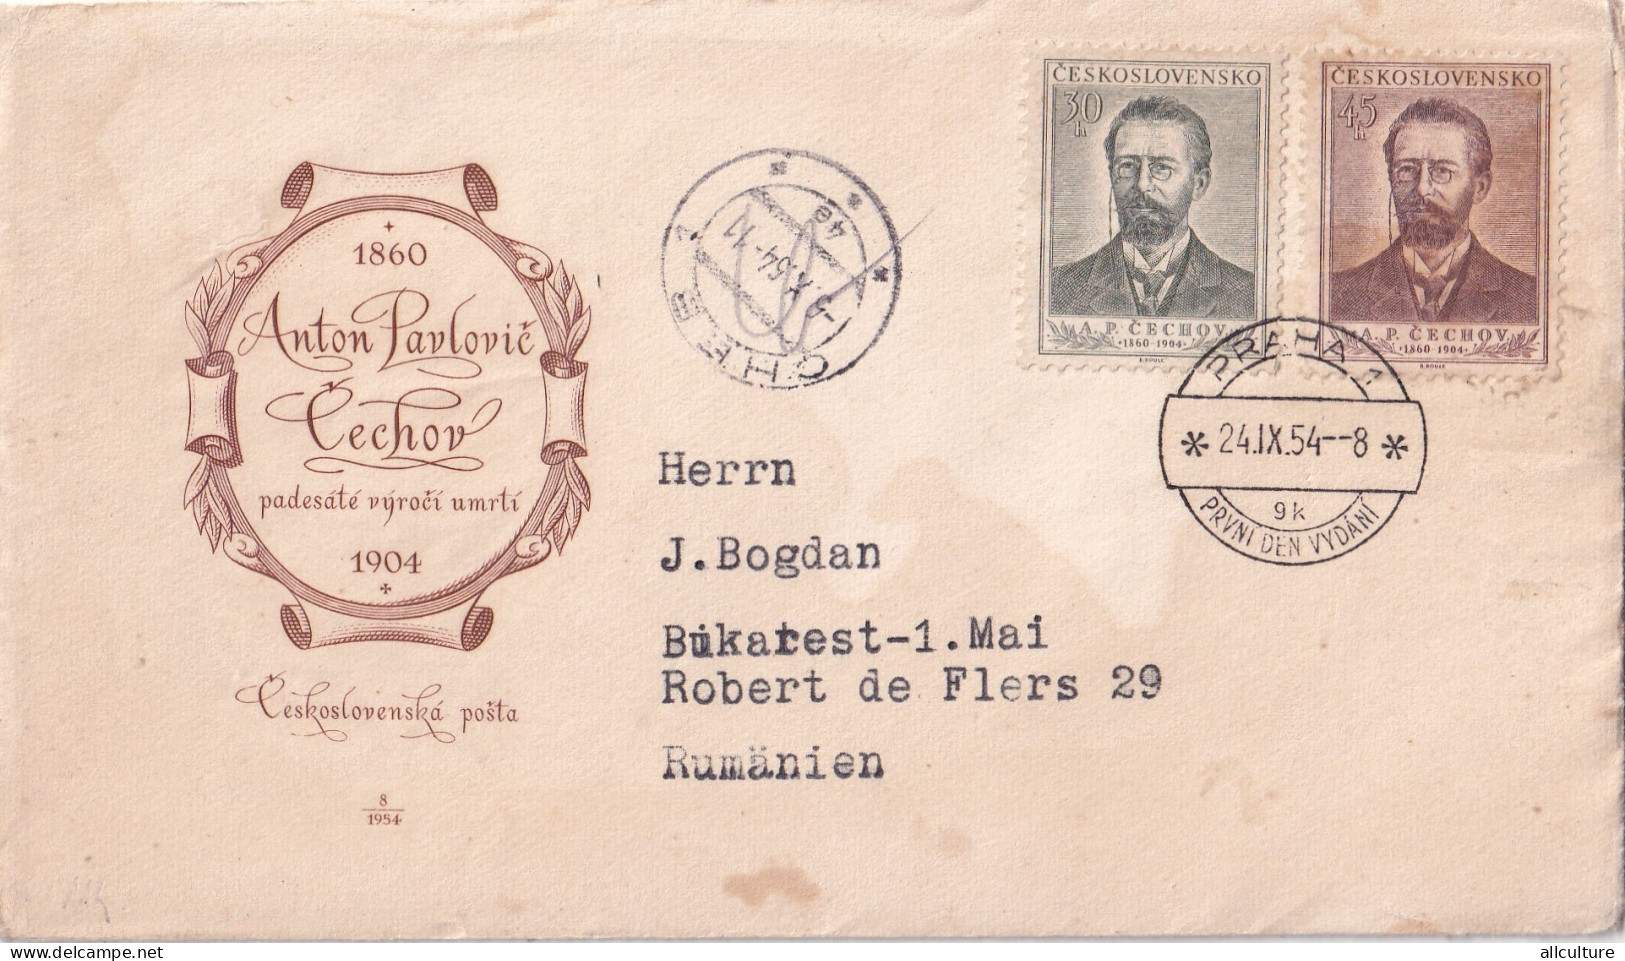 A23363 - Czech Republic - First Day Cover - Anton Pavlovic Cechov1904 - 1954 Stamp  - FDC